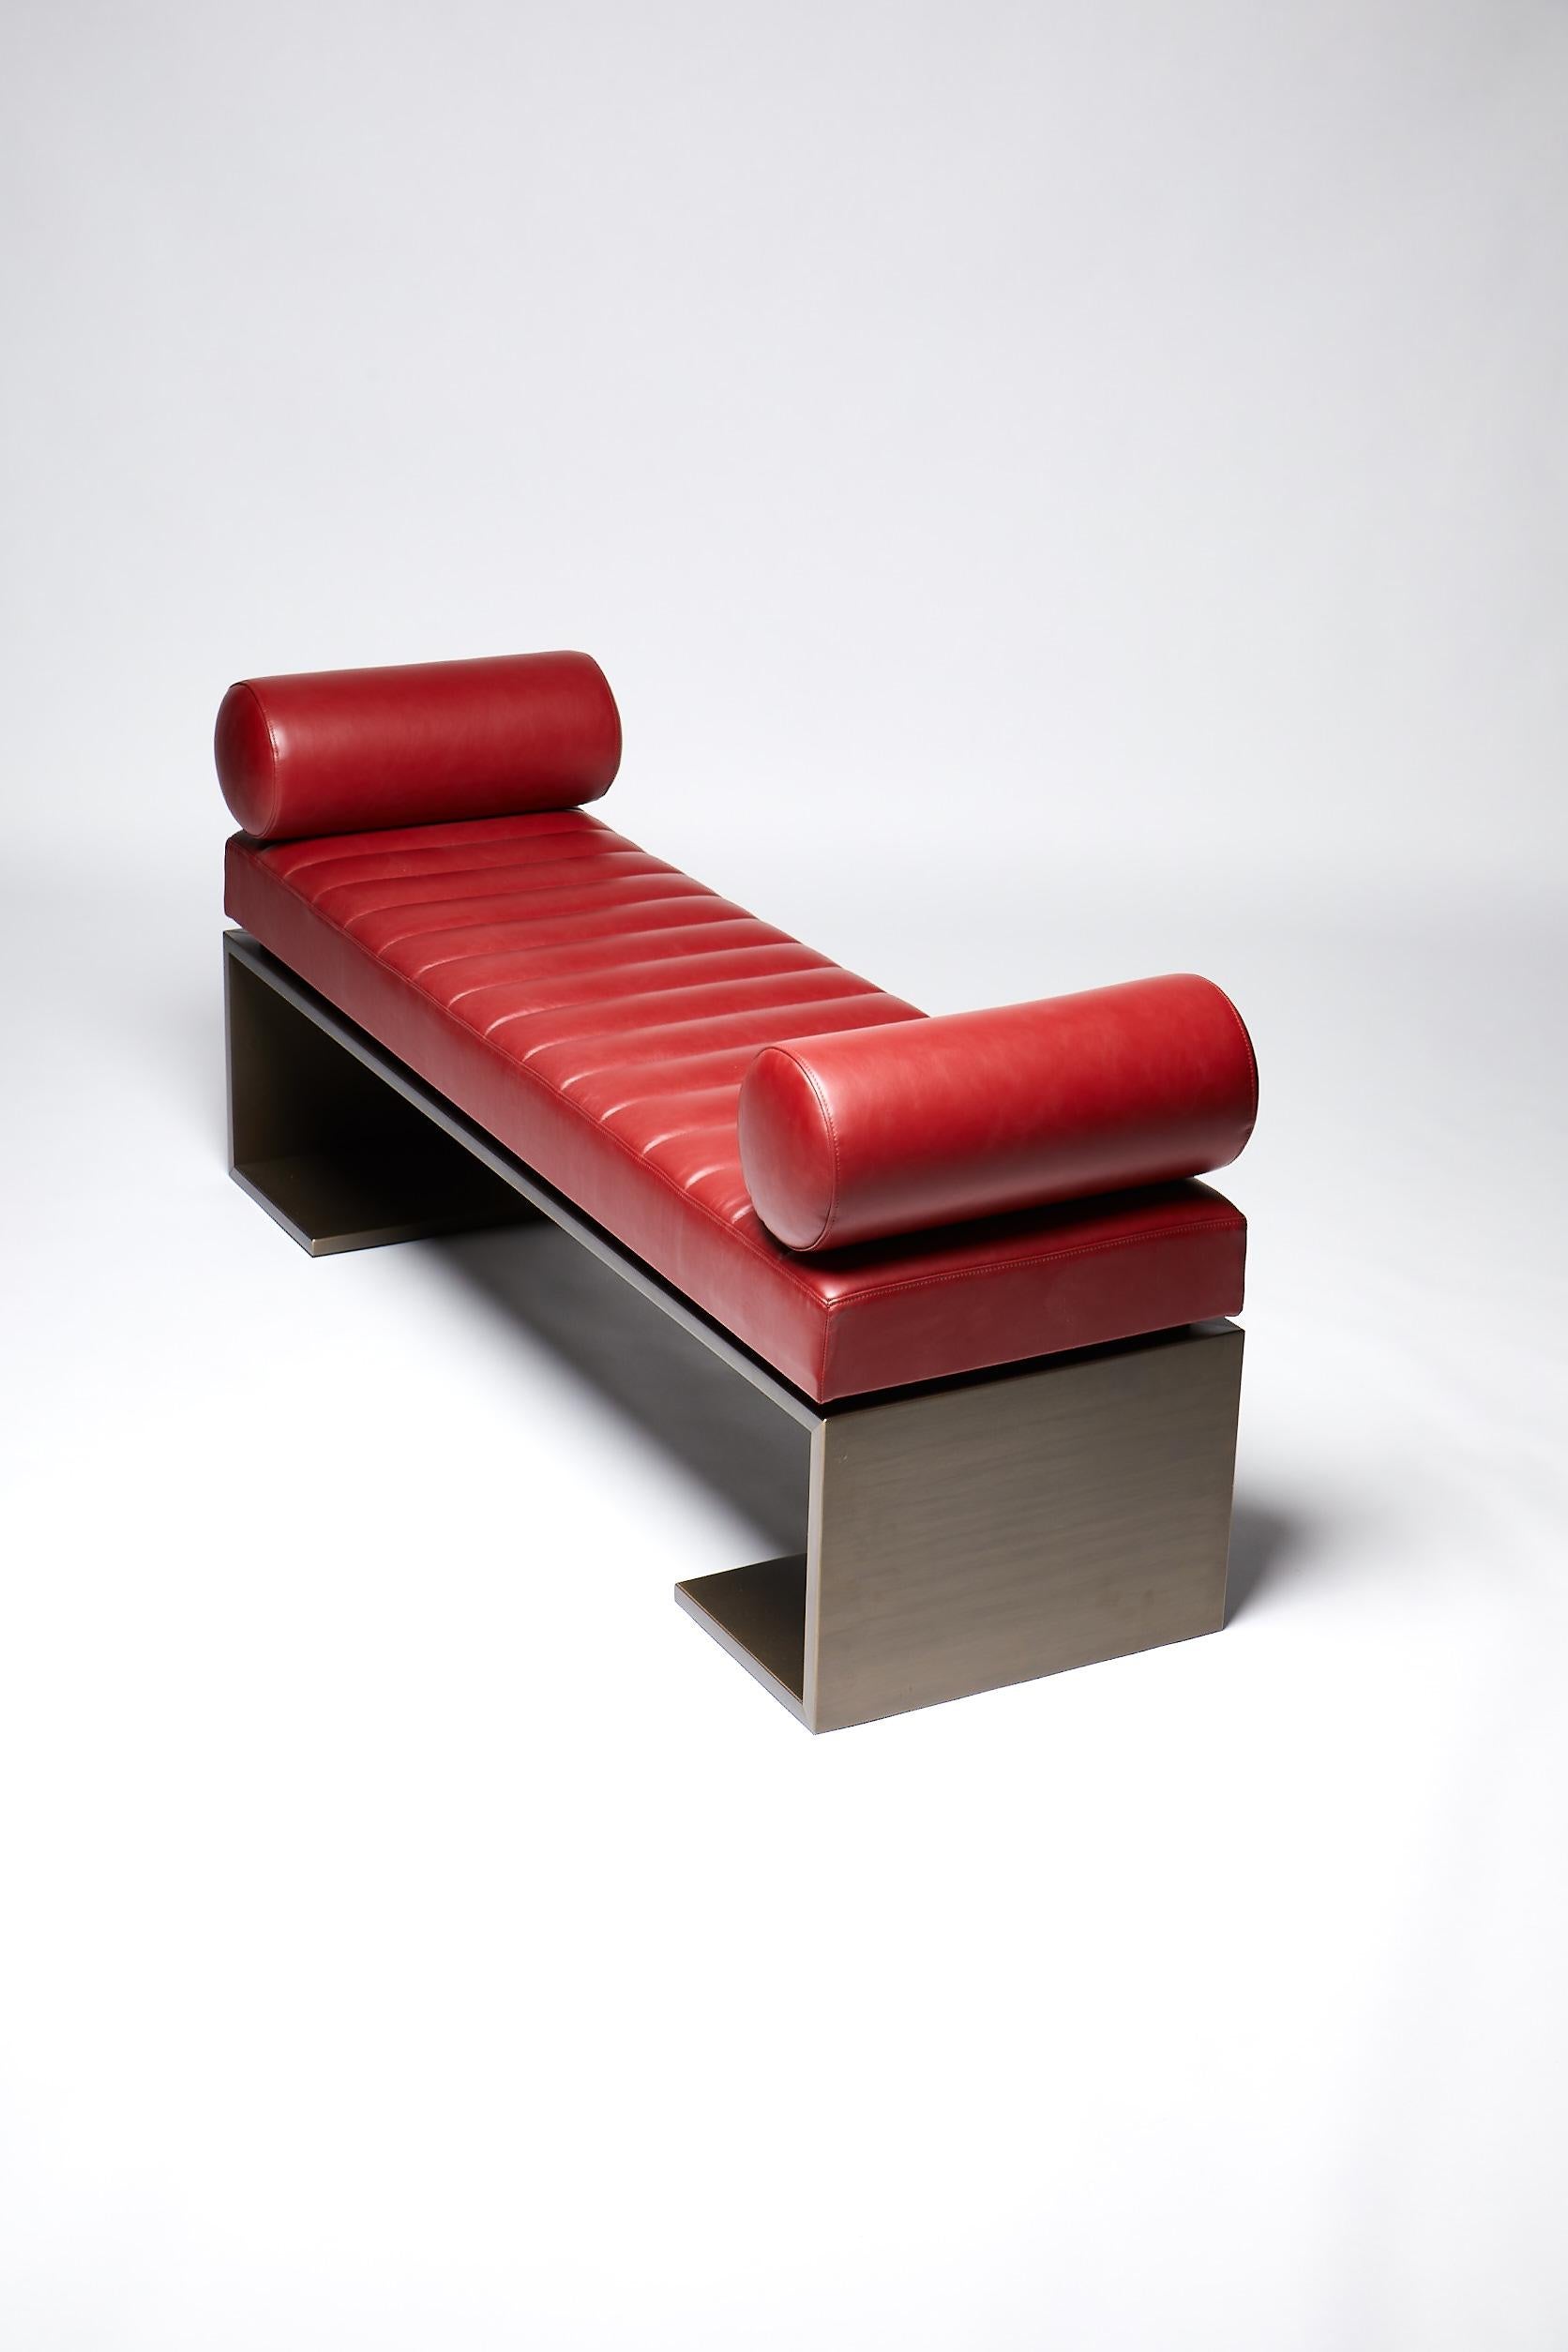 Italian Bronze & Leather Bench, KIMANI, by Reda Amalou Desgin, 2018 - Gallery Collection For Sale